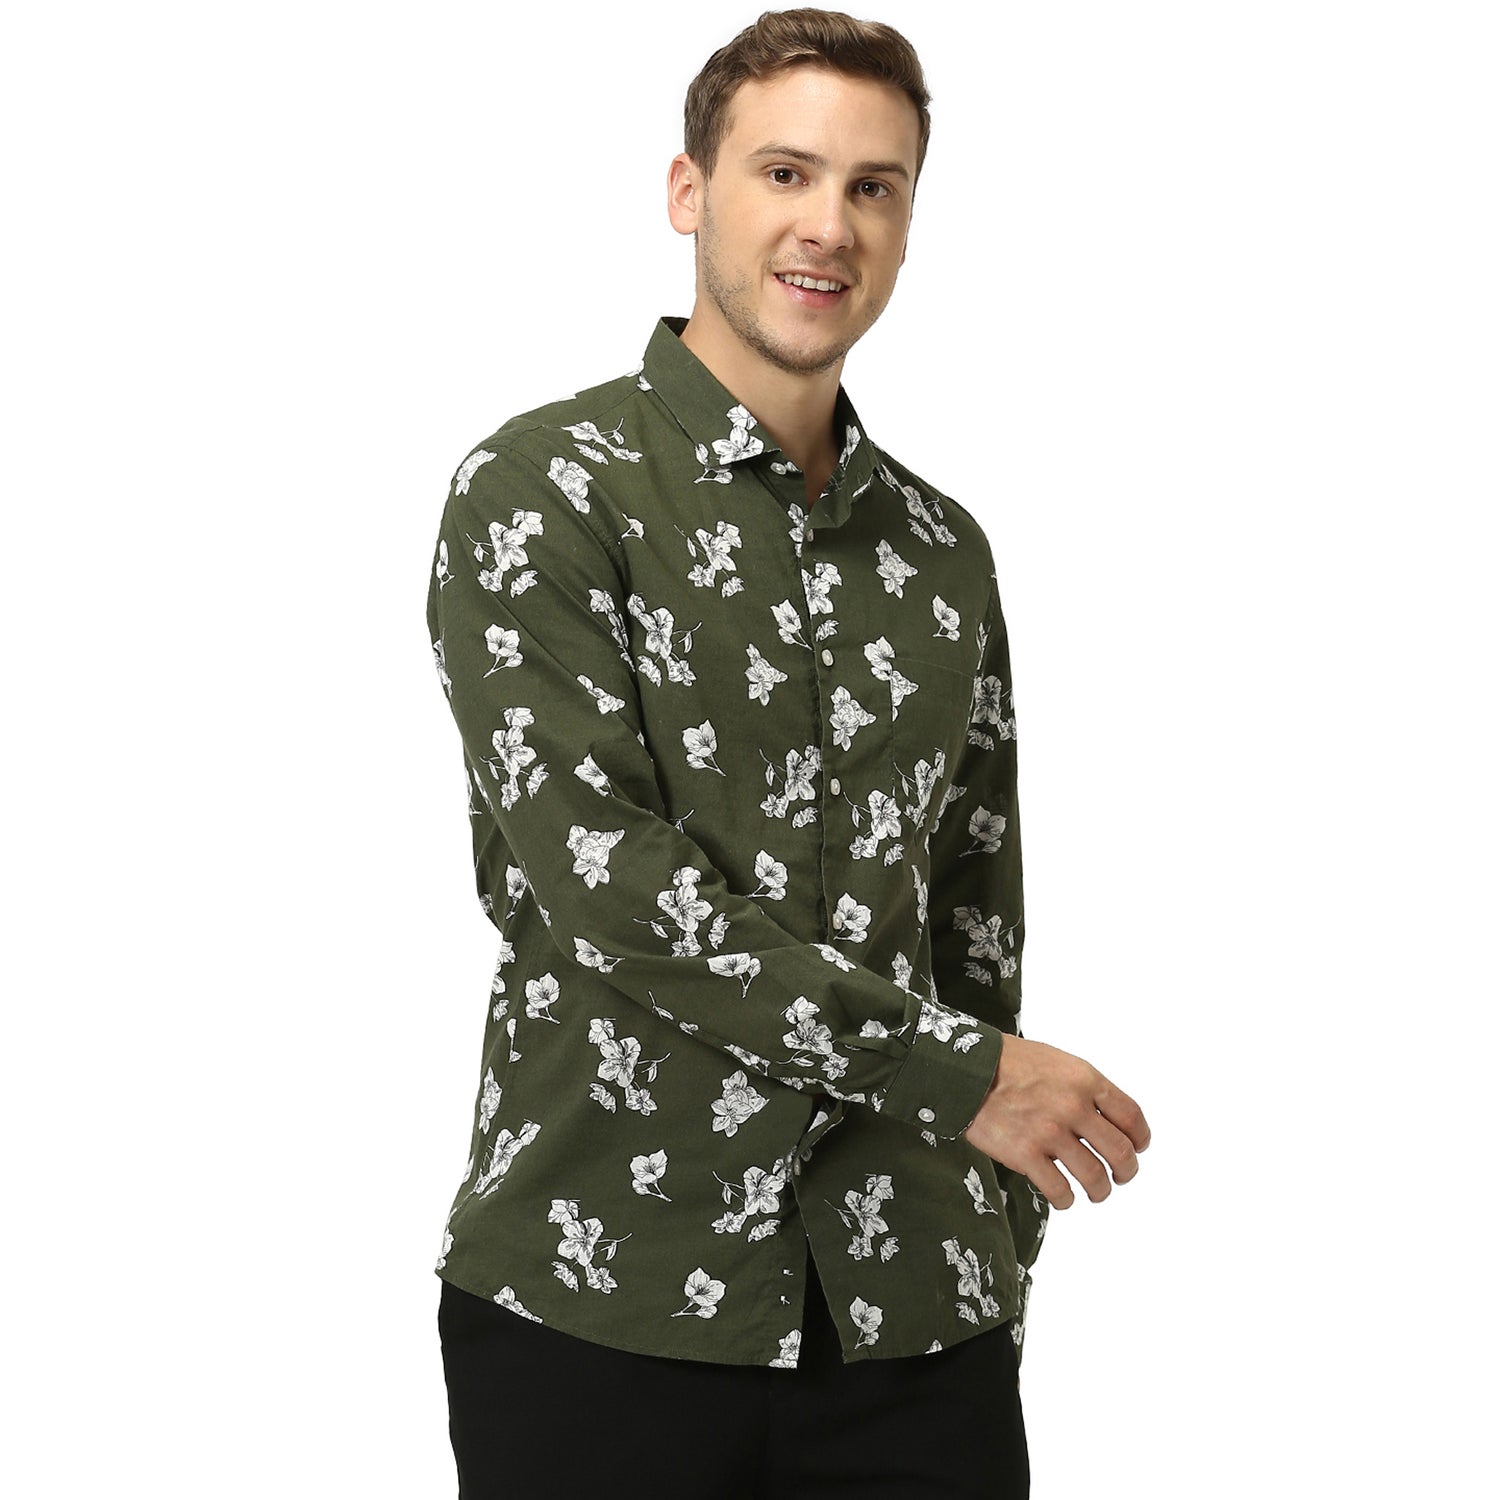 Olive Green and White Slim Fit Floral Printed Casual Shirt (RAMANN2)